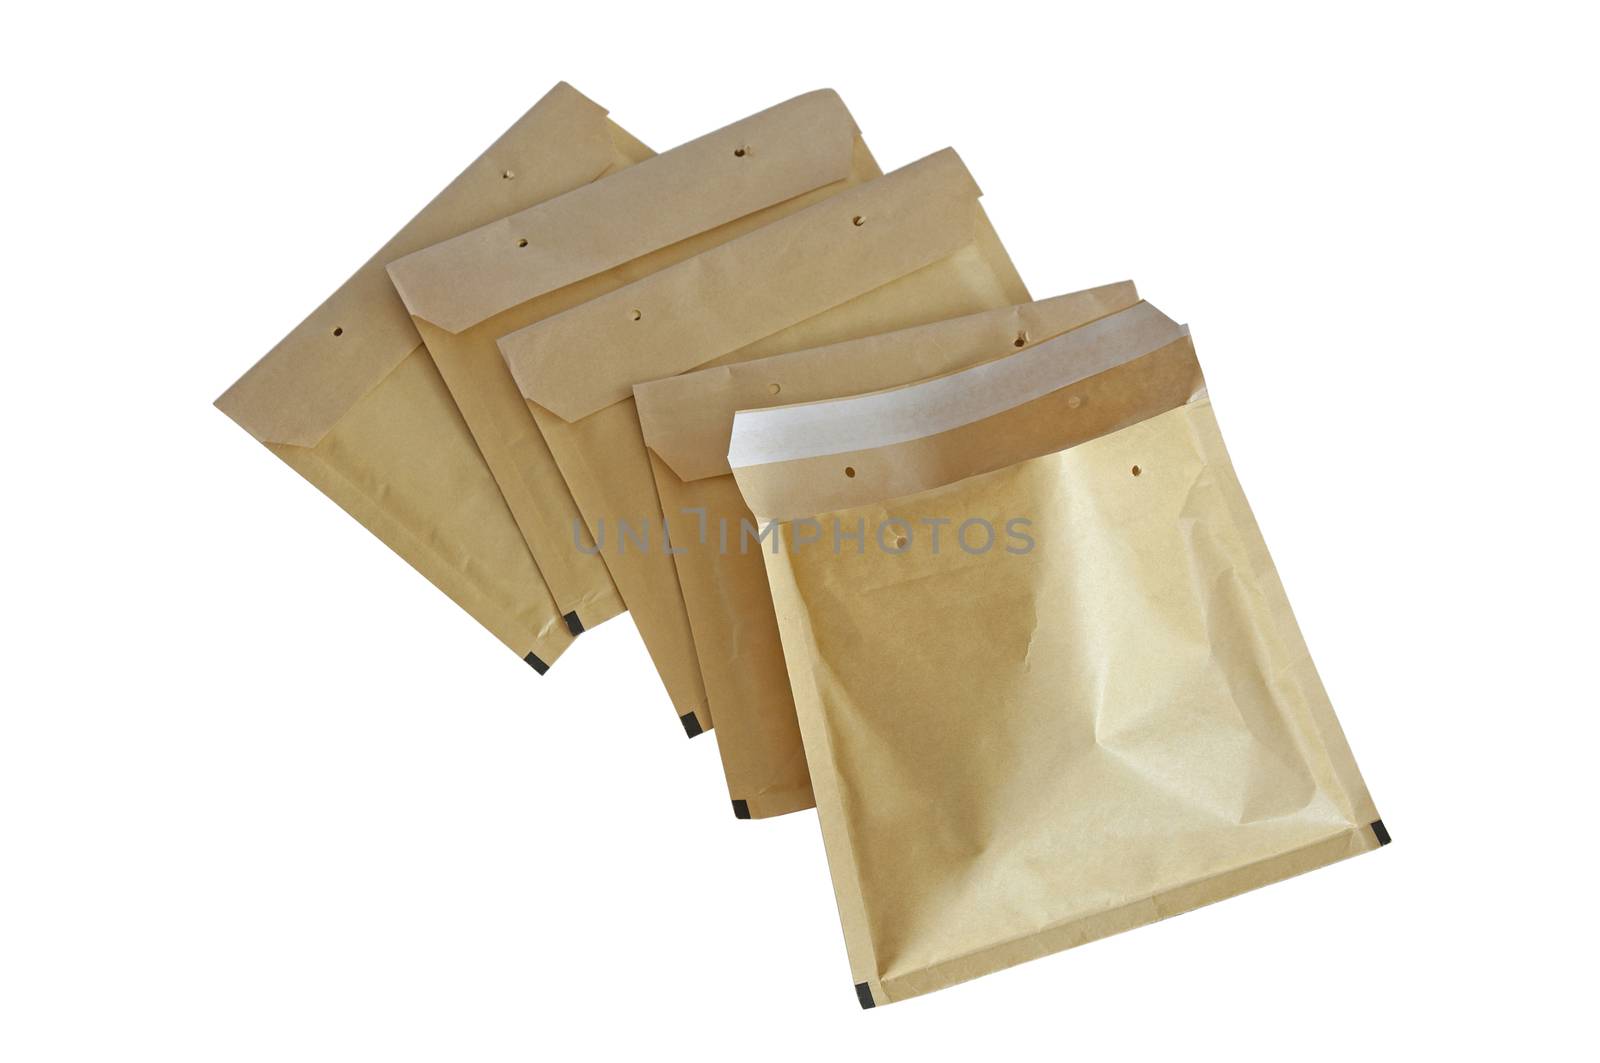 Yellow packaging envelopes isolated on white